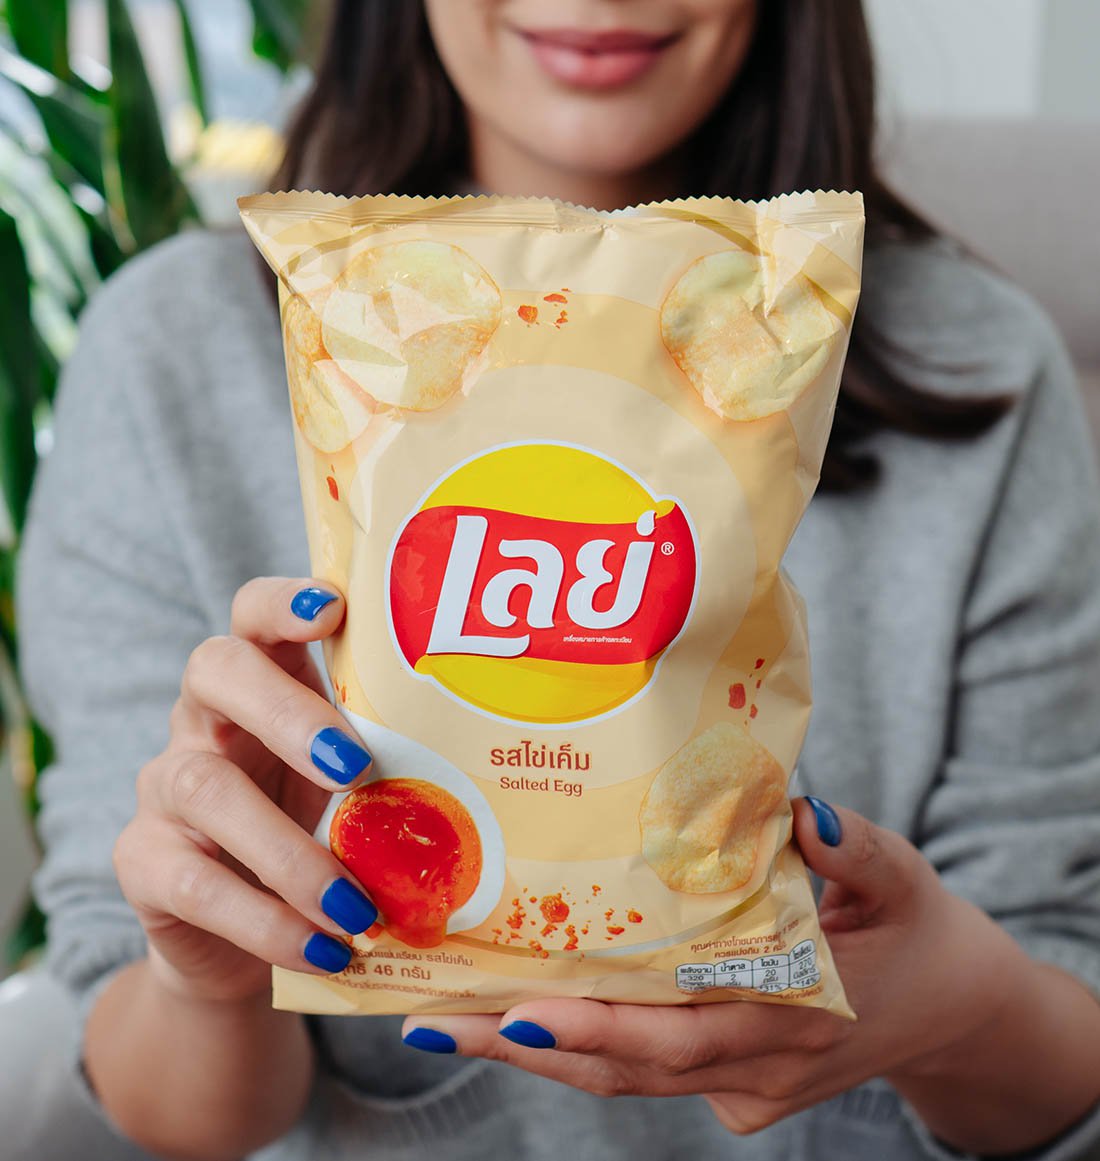 Woman holding up a bag of Lay's Salted Egg chips from Thailand